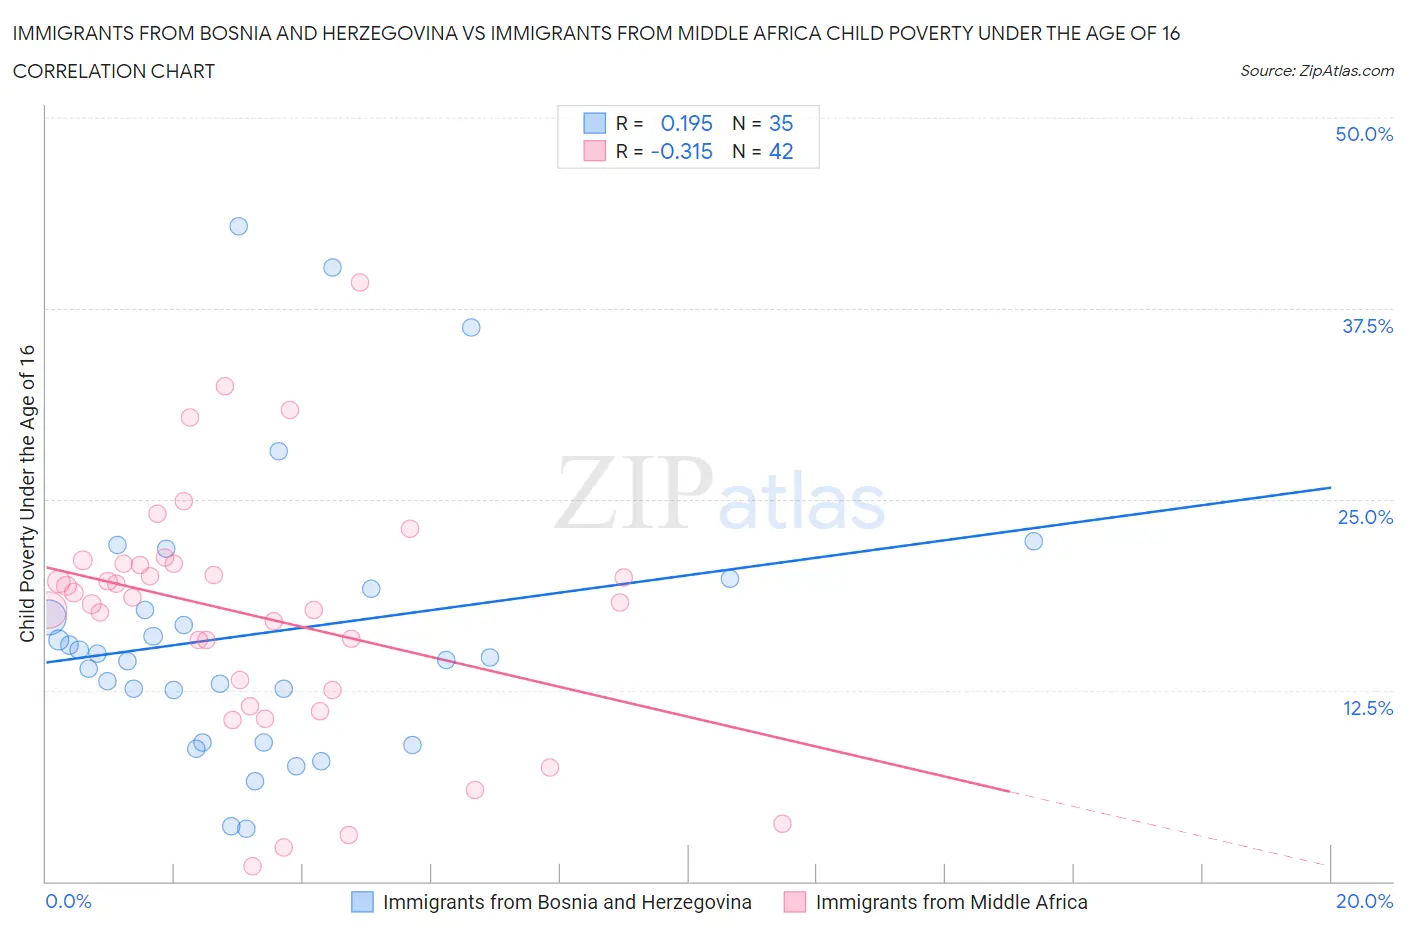 Immigrants from Bosnia and Herzegovina vs Immigrants from Middle Africa Child Poverty Under the Age of 16